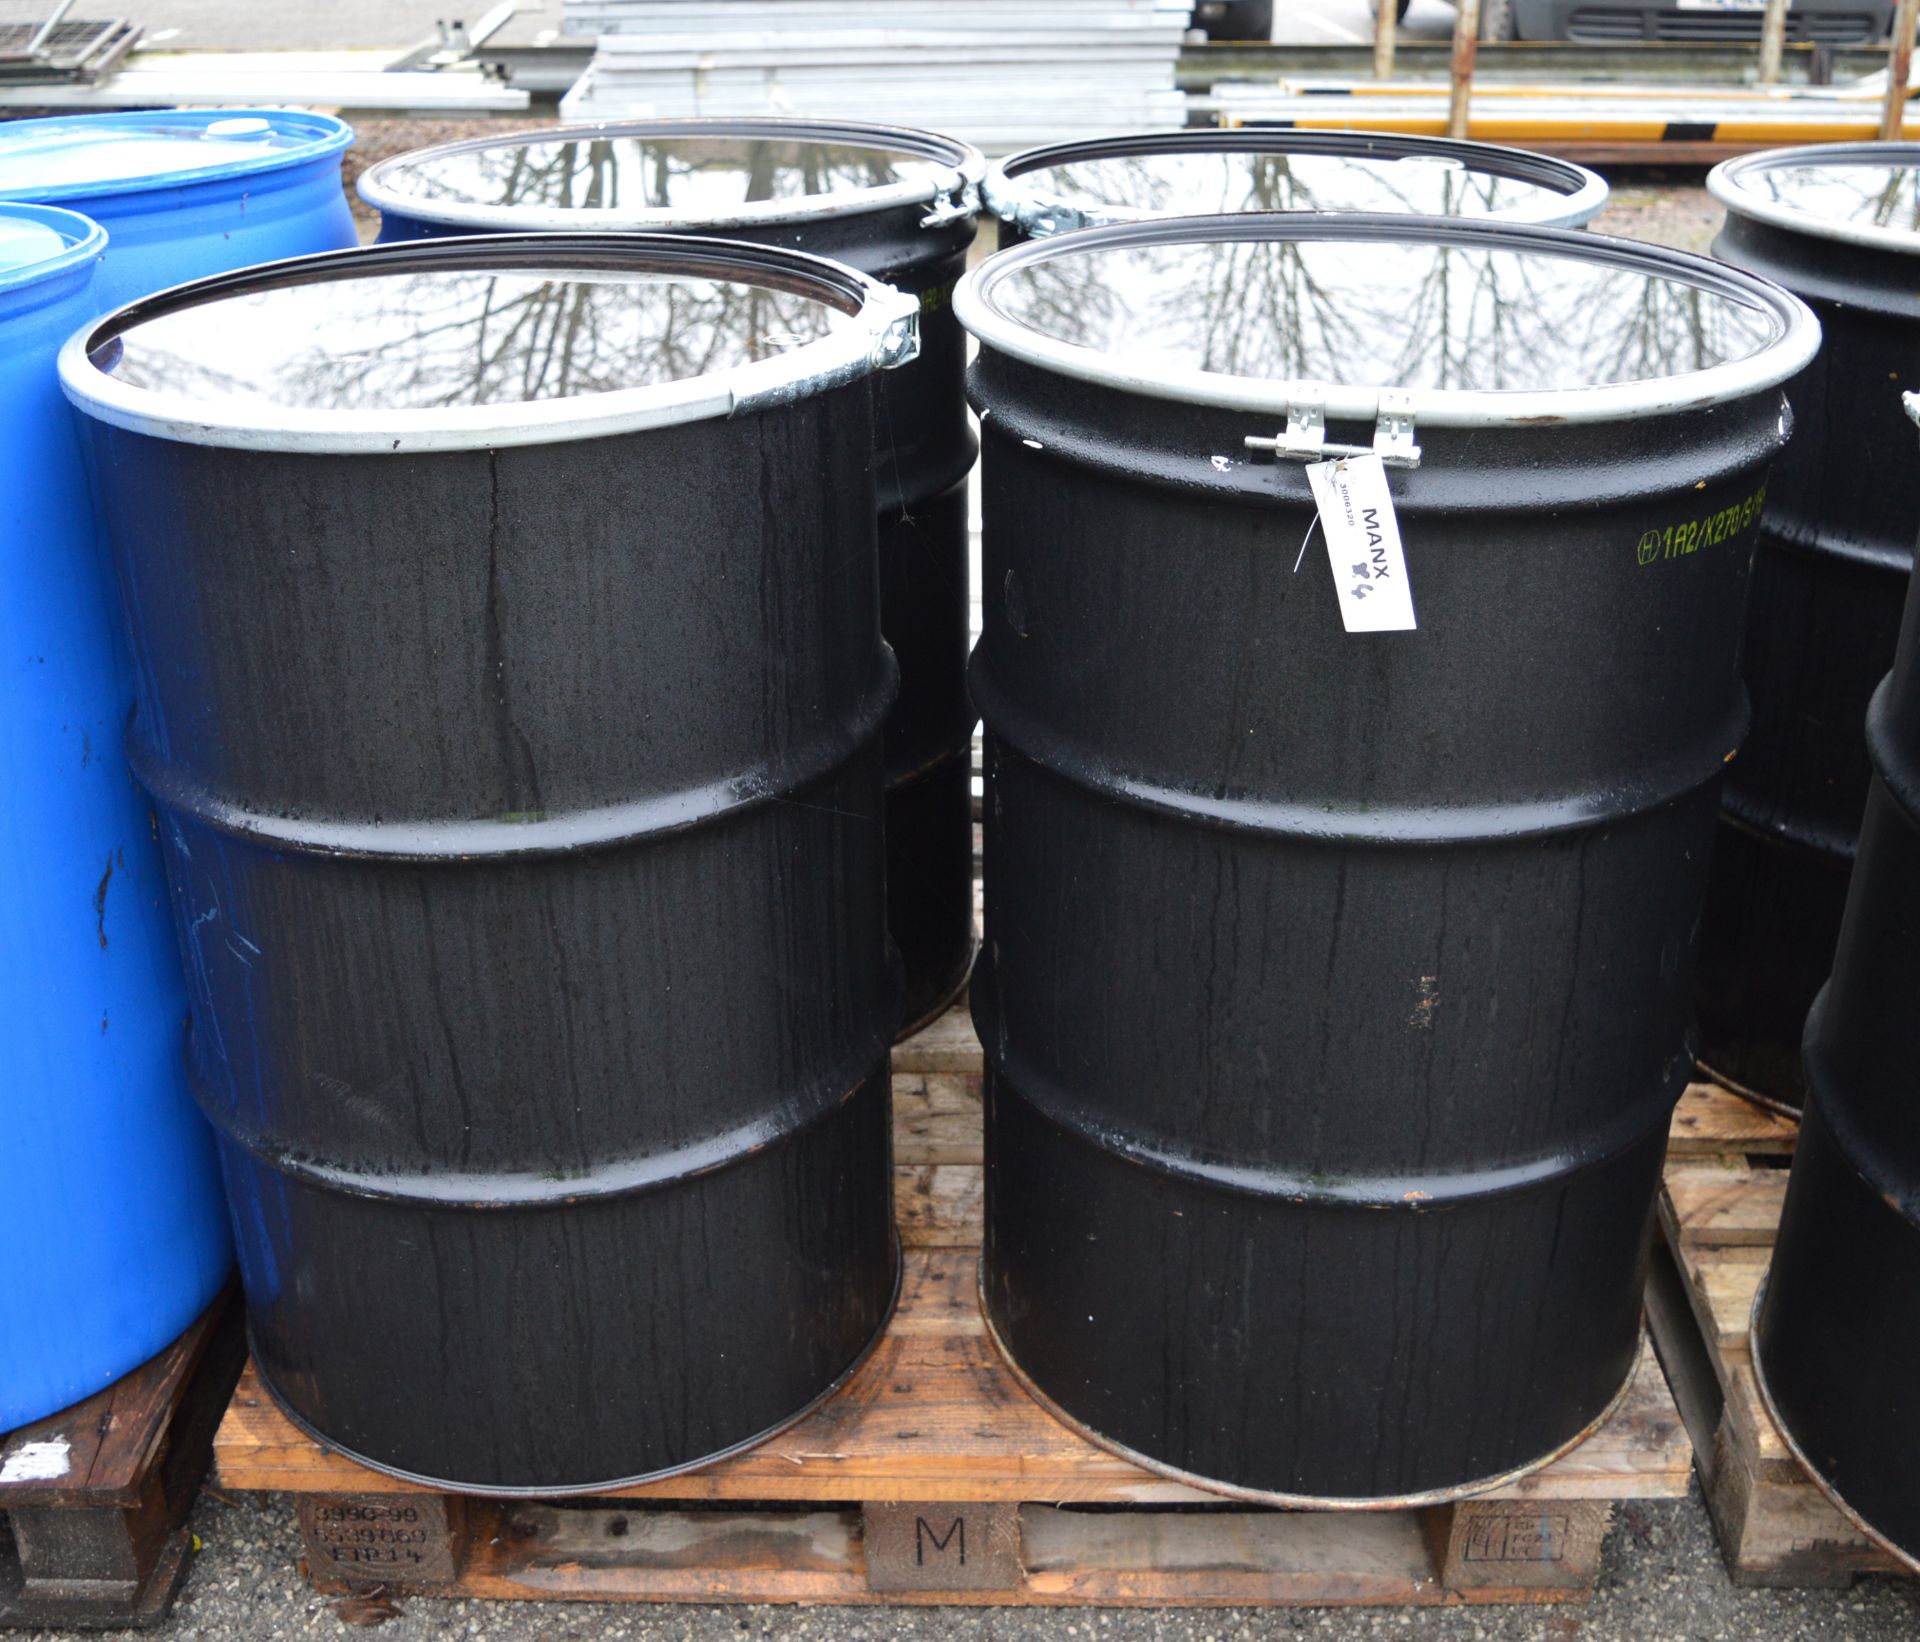 4x 45 Gallon Drums with Removable Lids.